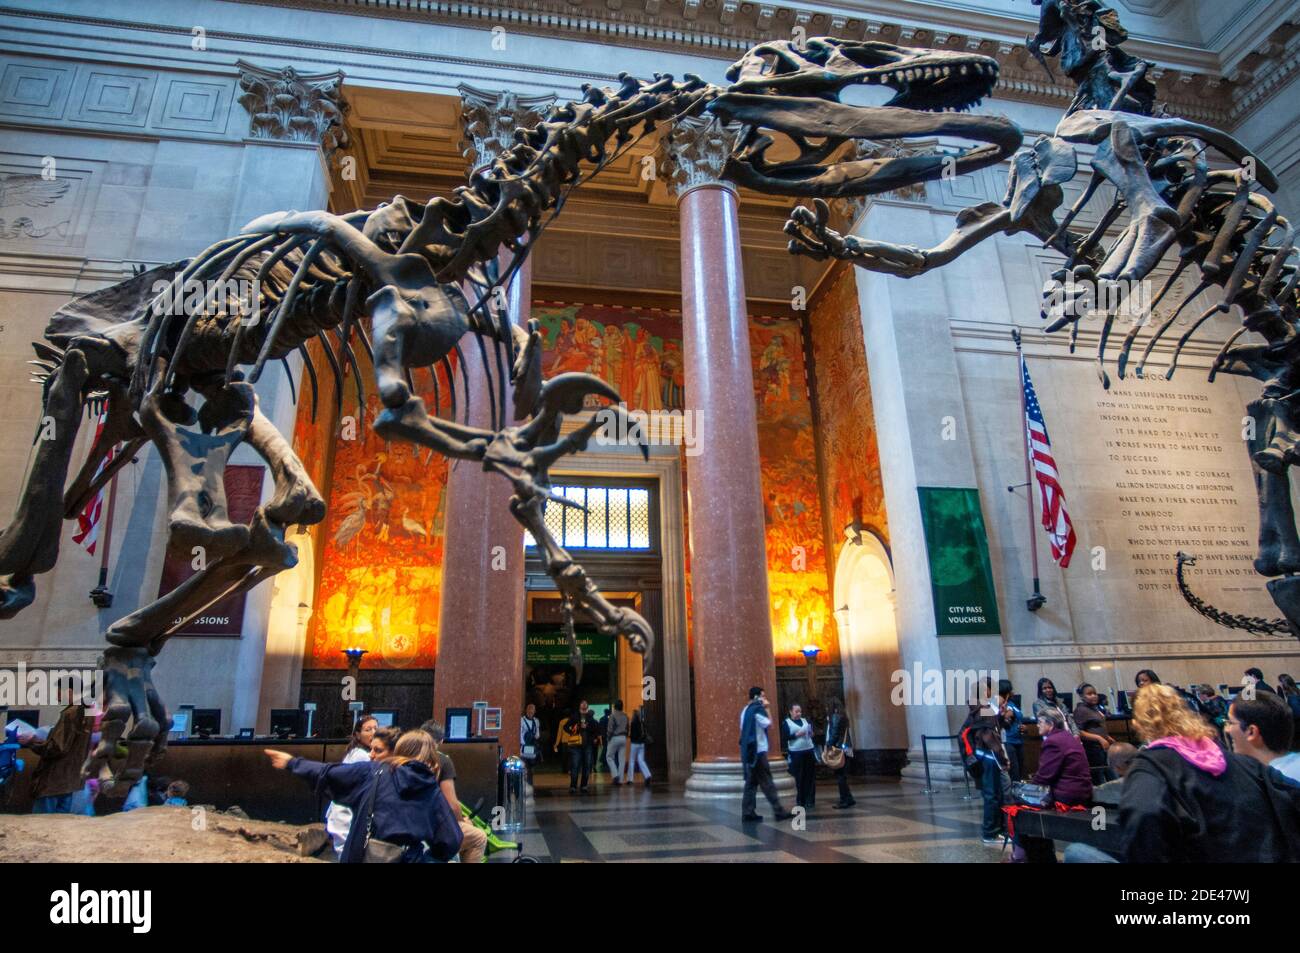 Dinosaur skeleton exhibits in the Main Hall of the American museum on natural history in Manhattan, New York Stock Photo